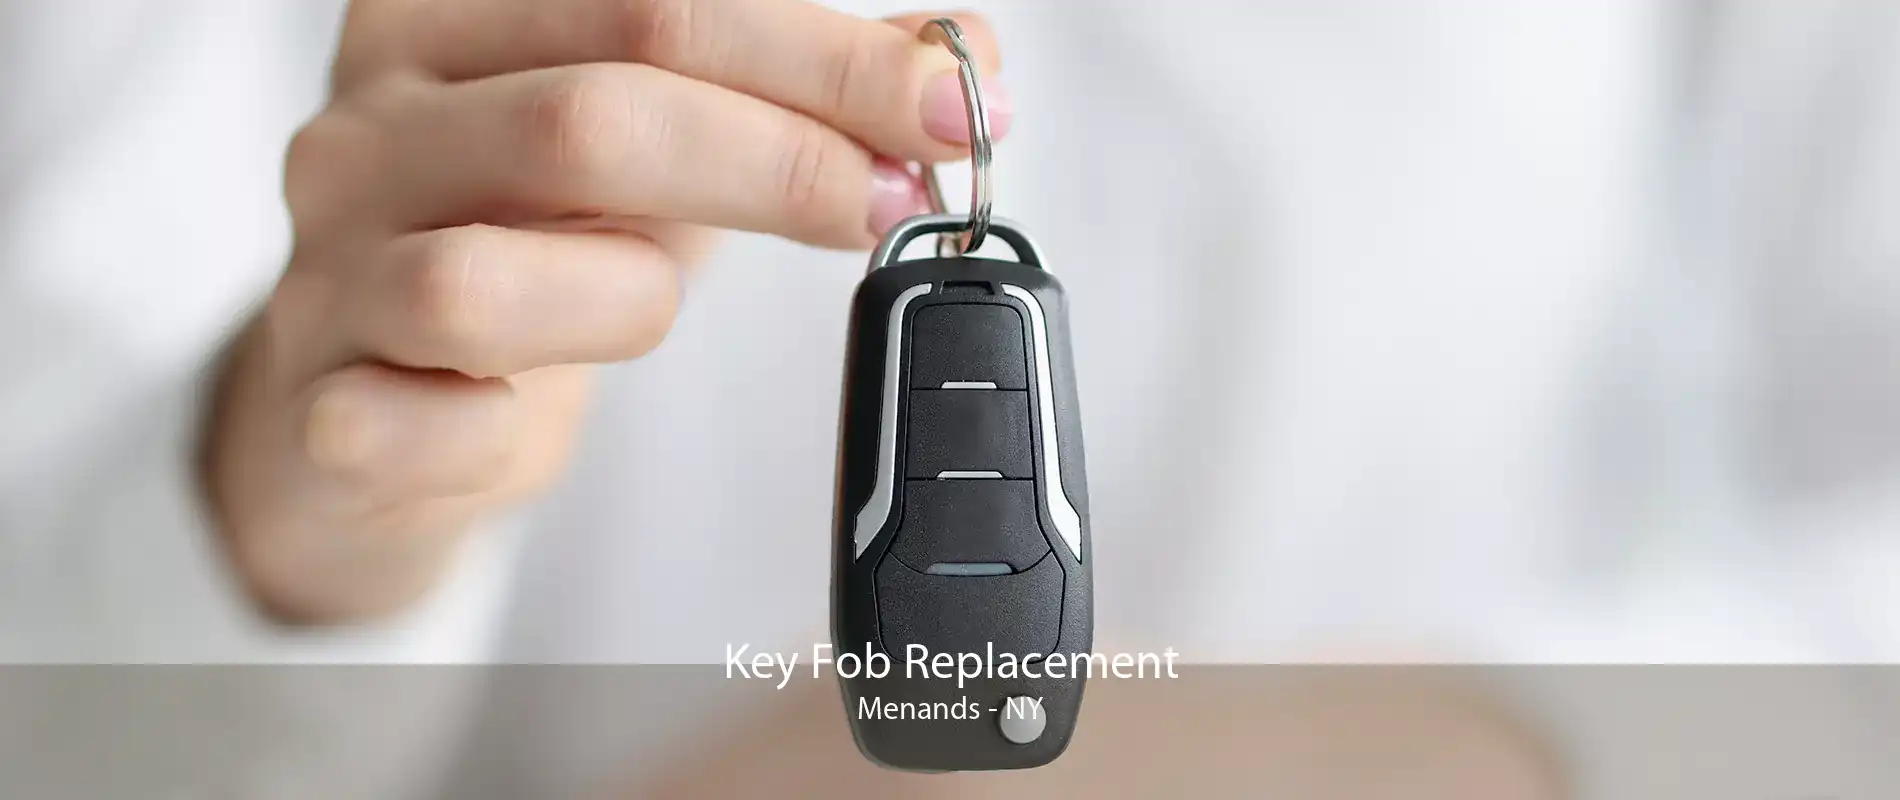 Key Fob Replacement Menands - NY